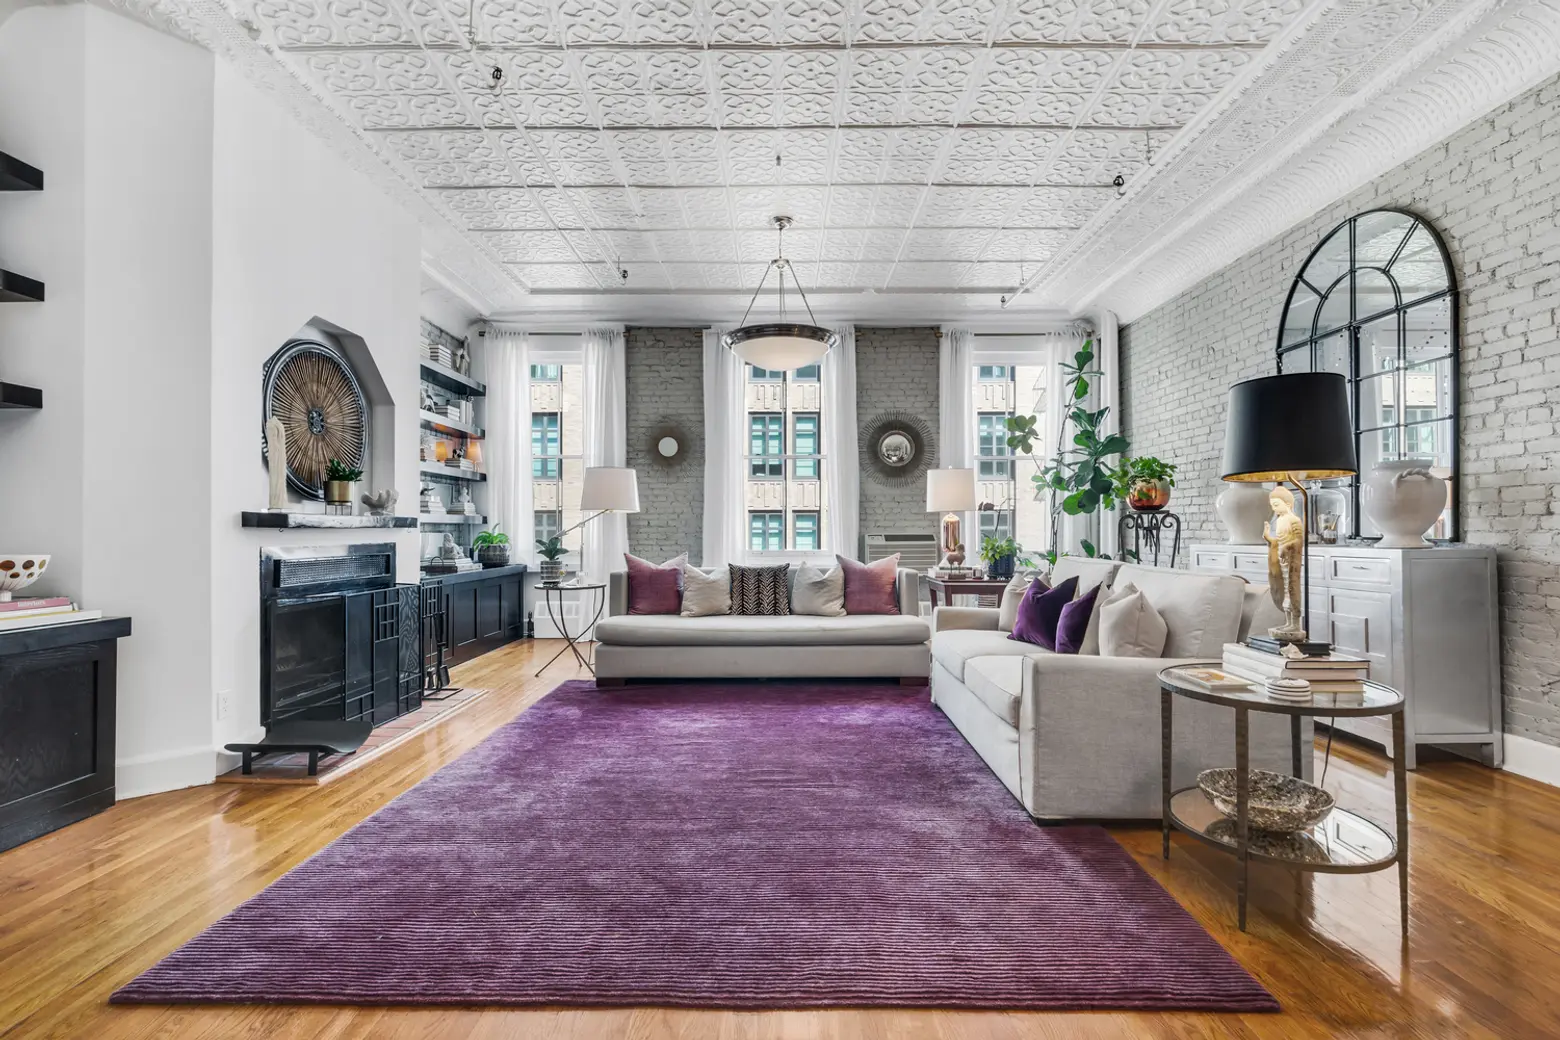 $1.75M Tribeca loft was once the Engine 29 firehouse